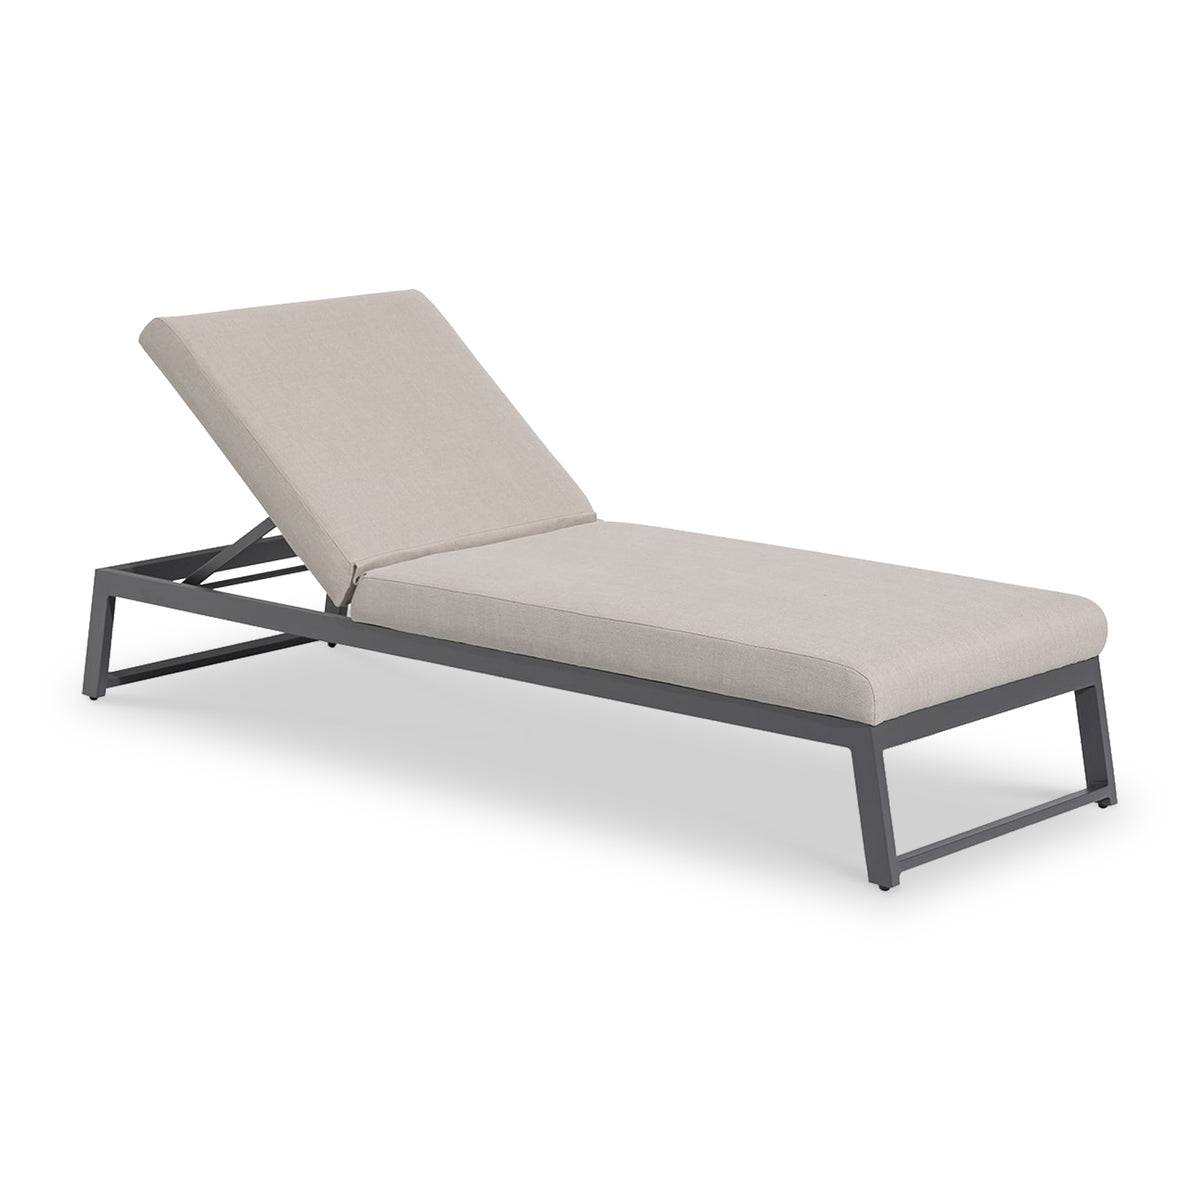 Maze Allure Outmeal Sunlounger from Roseland Furniture